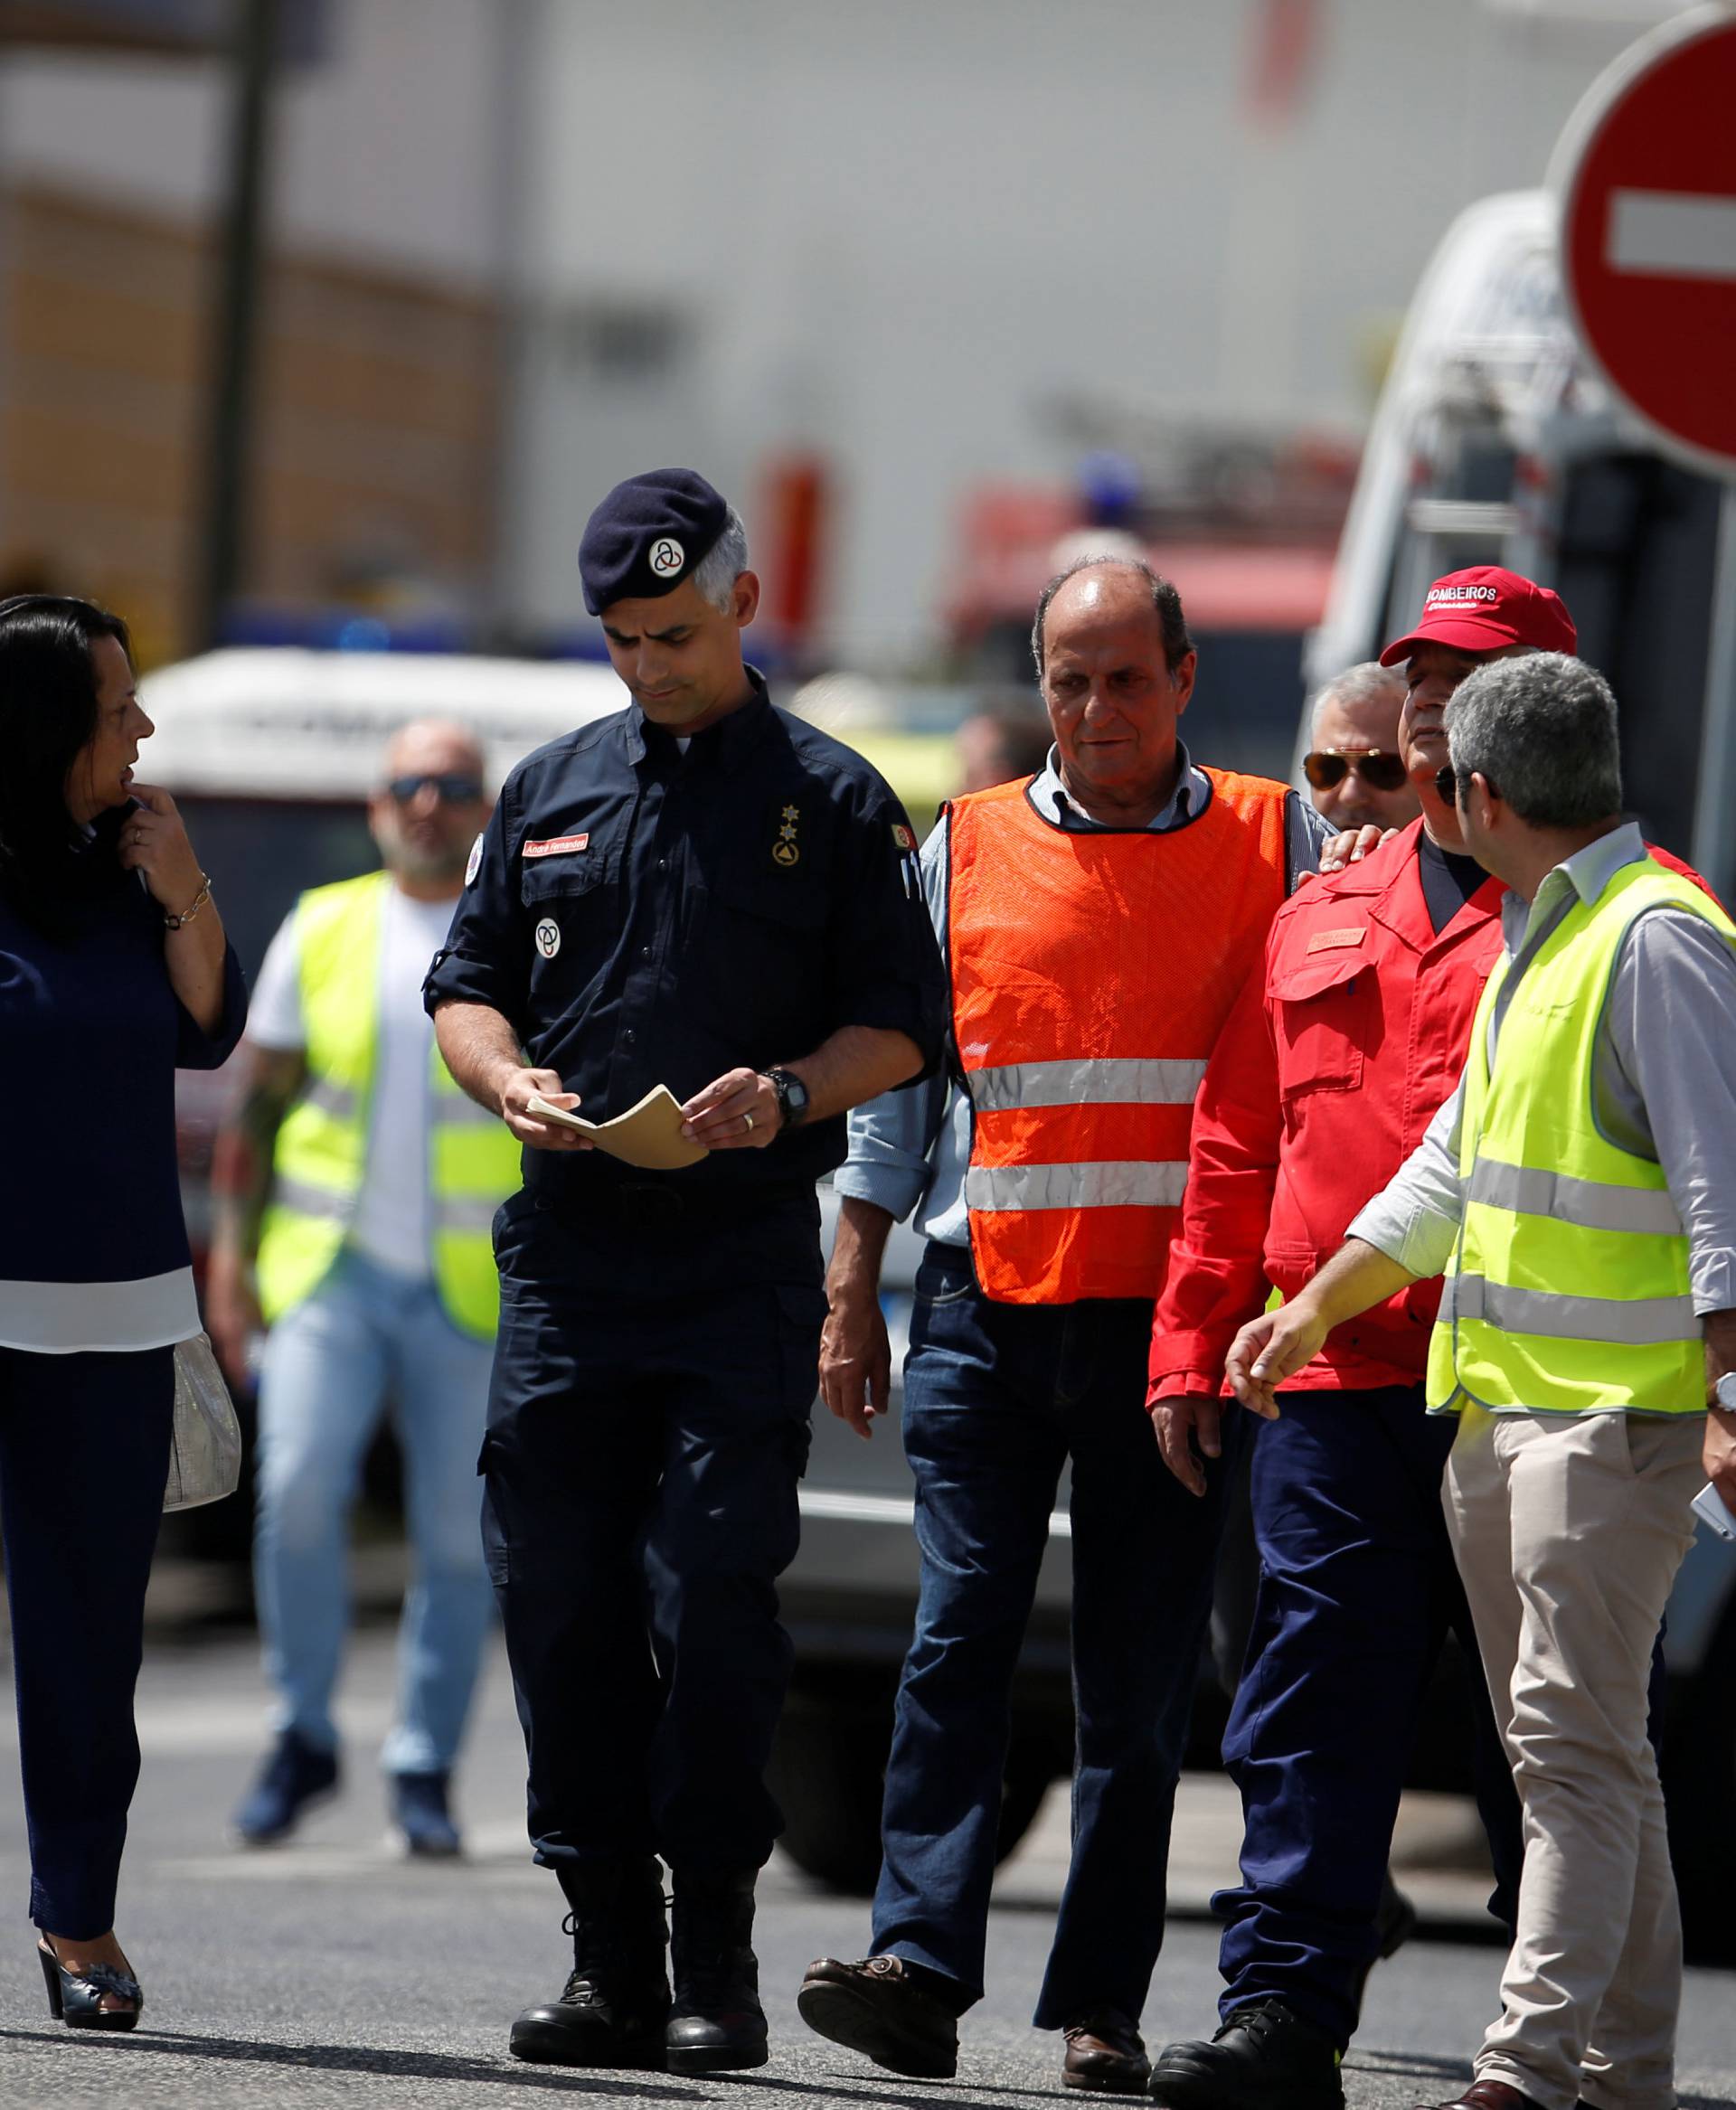 Members of civilian protections leave the site where a small airplane crashed, near a supermarket in a residential area outside Lisbon, Portugal